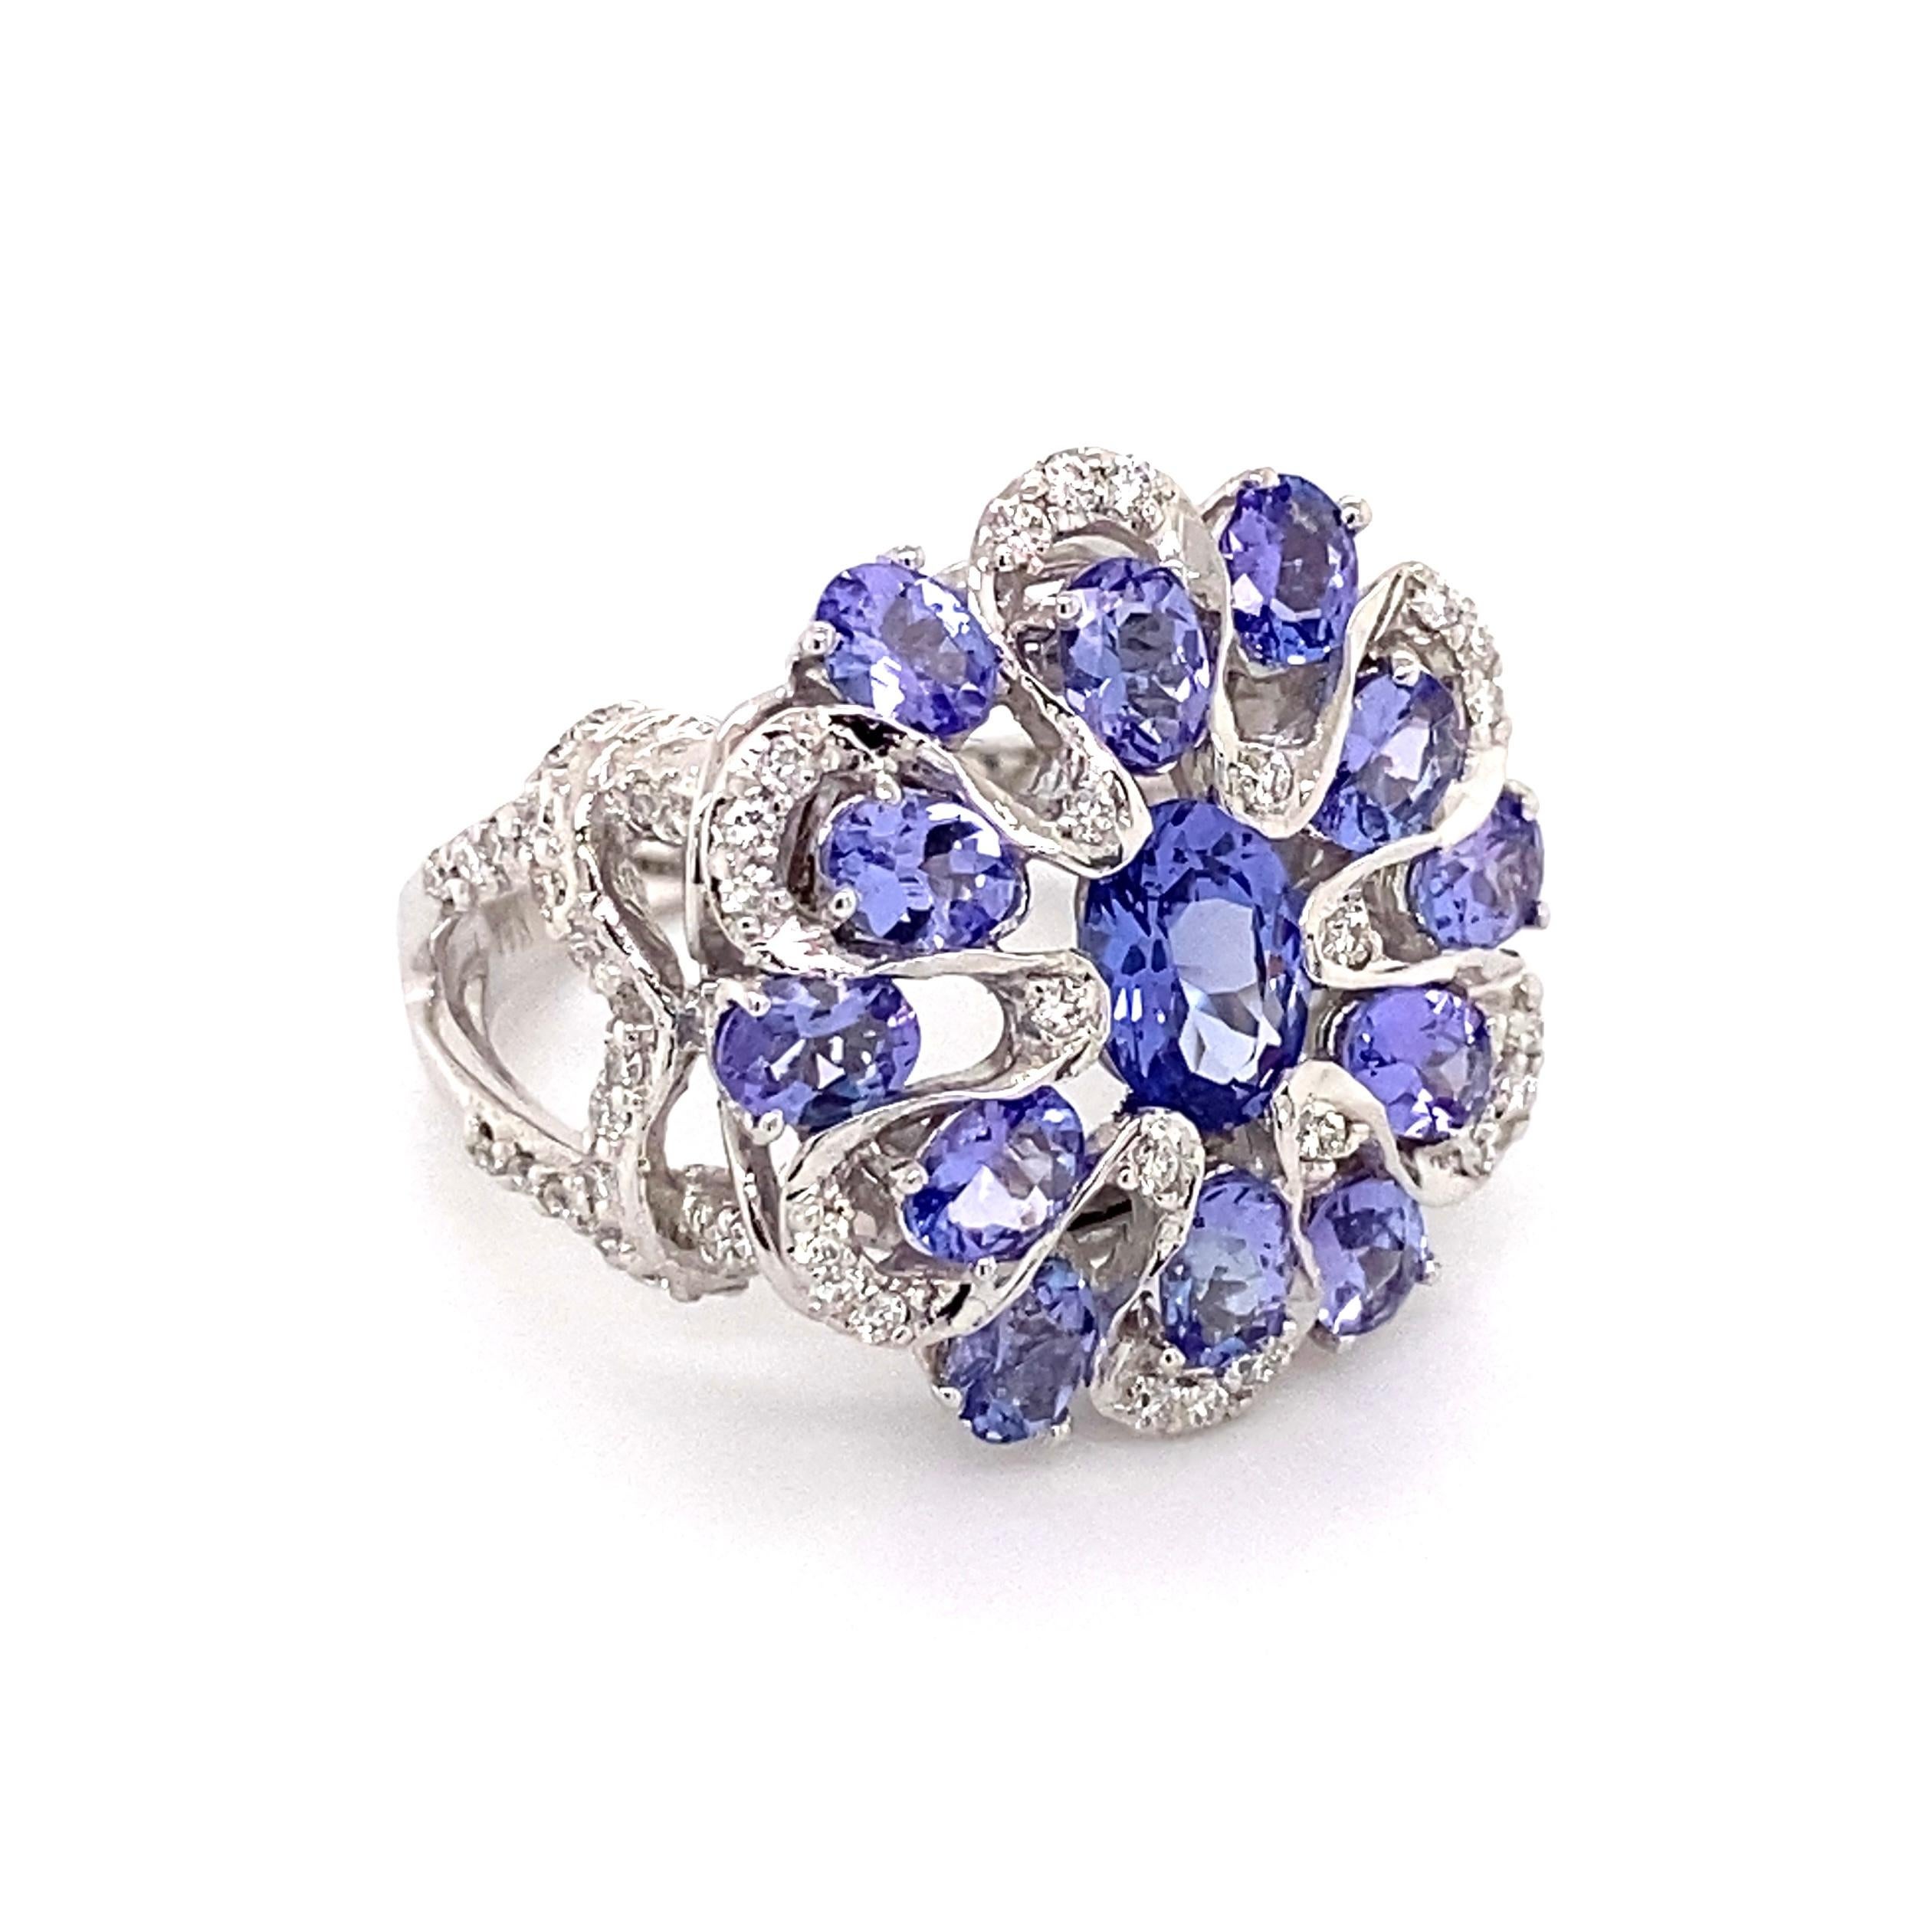 Simply Beautiful! Striking! and Finely detailed Tanzanite and Diamond Cocktail Ring. Center Hand set with an oval Tanzanite, artfully surrounded by Tanzanite and Diamonds. Measuring approx. 1.00” l x 0.84” w x 0.80” h. Hand crafted in 14 Karat White